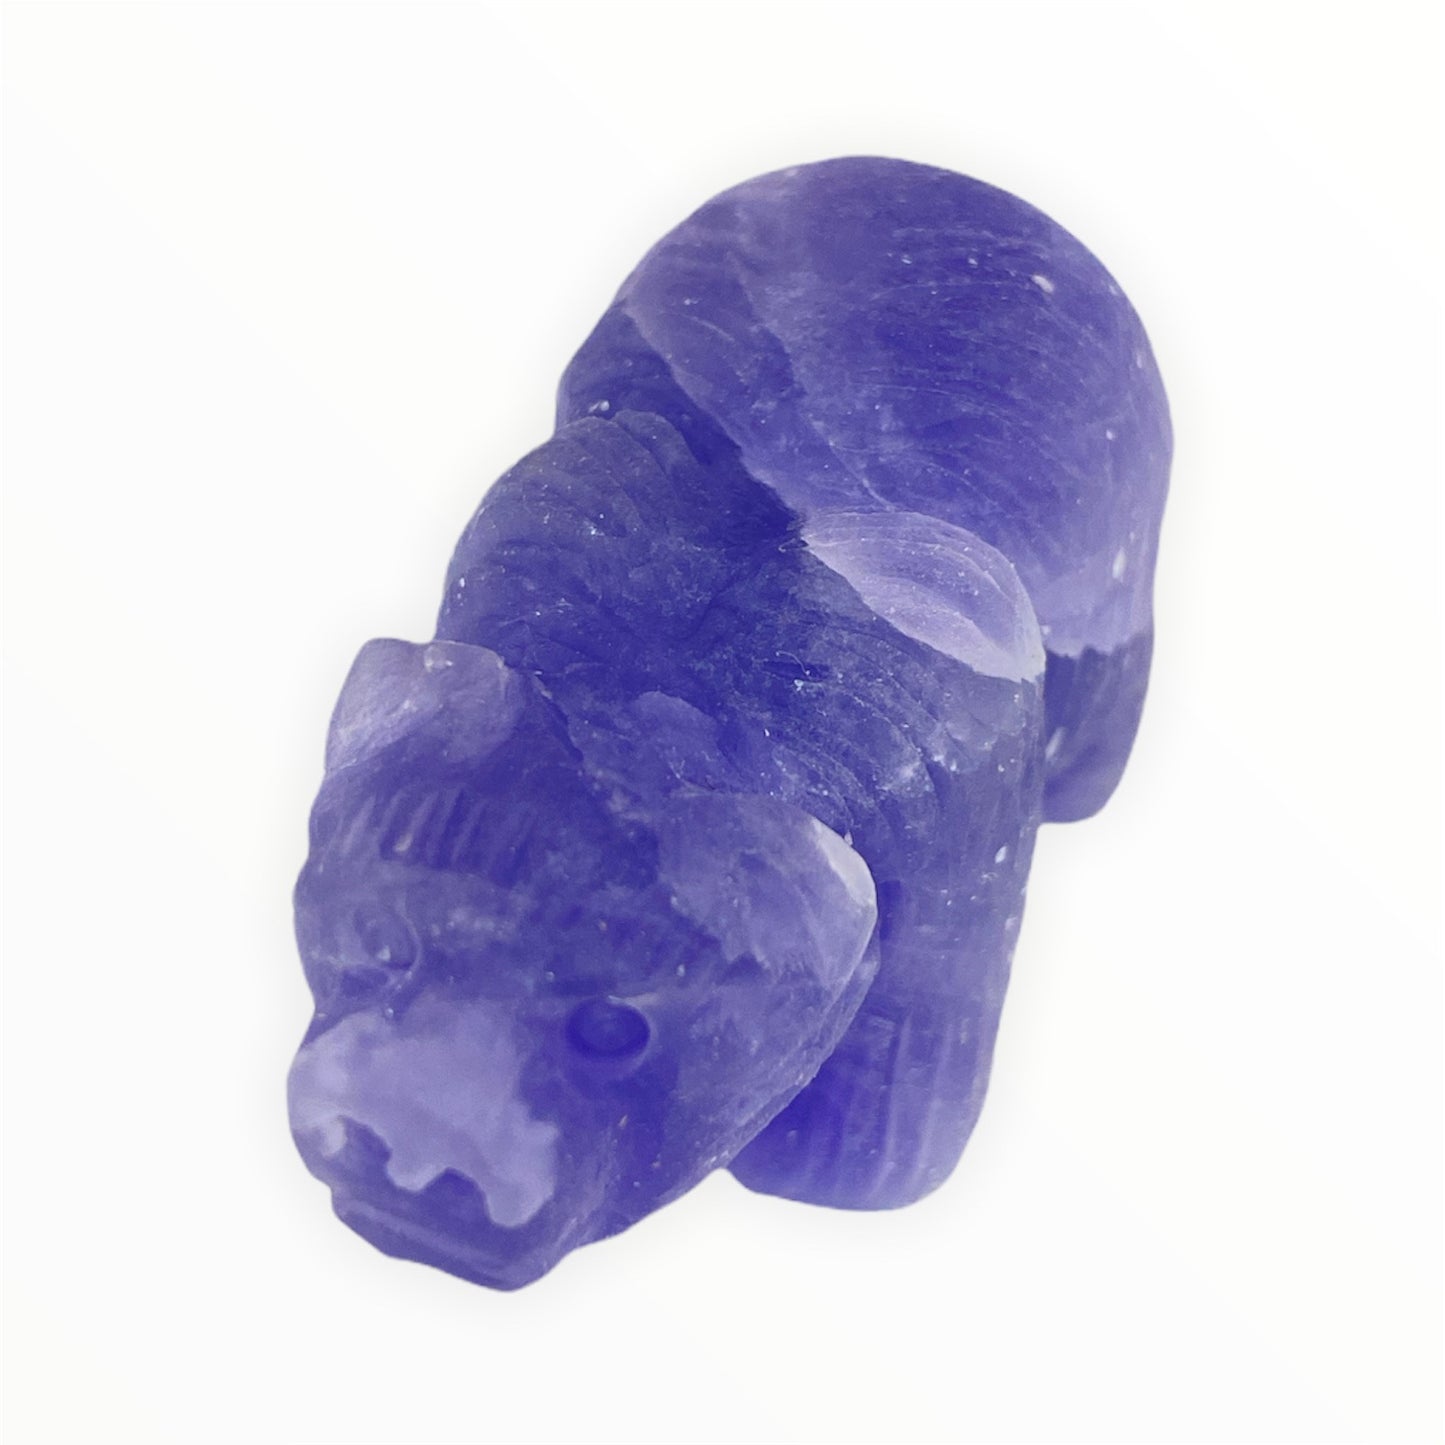 Ours - Fluorite violette - 5 cm - Chine - NEW921